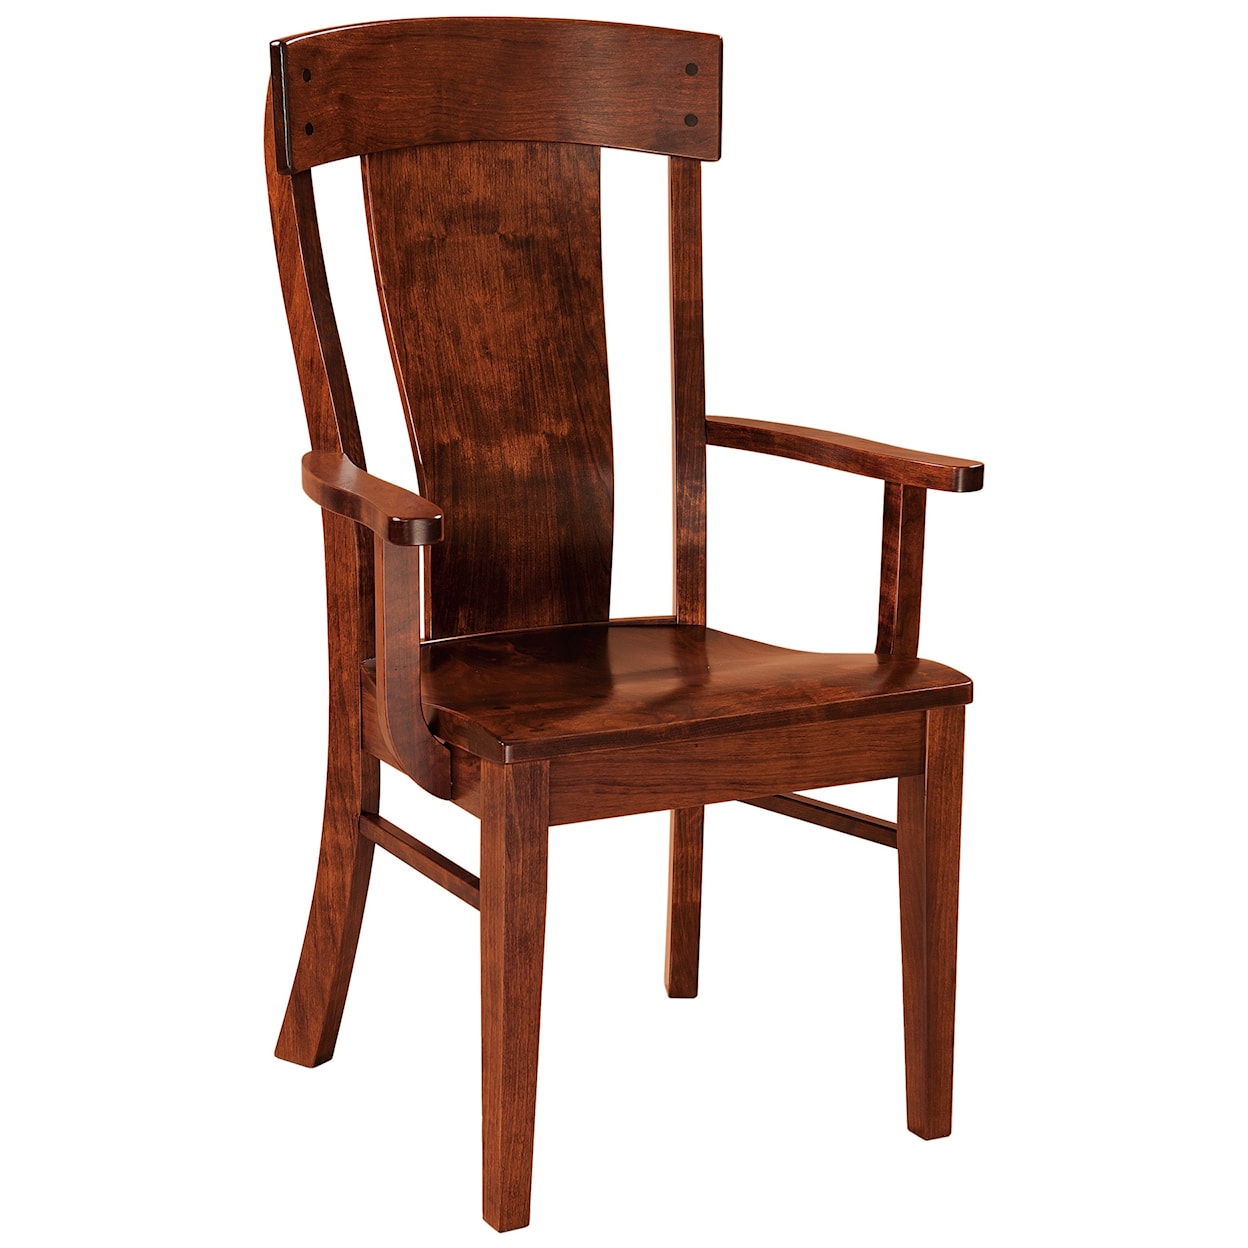 F&N Woodworking Lacombe Arm Chair - Leather Seat